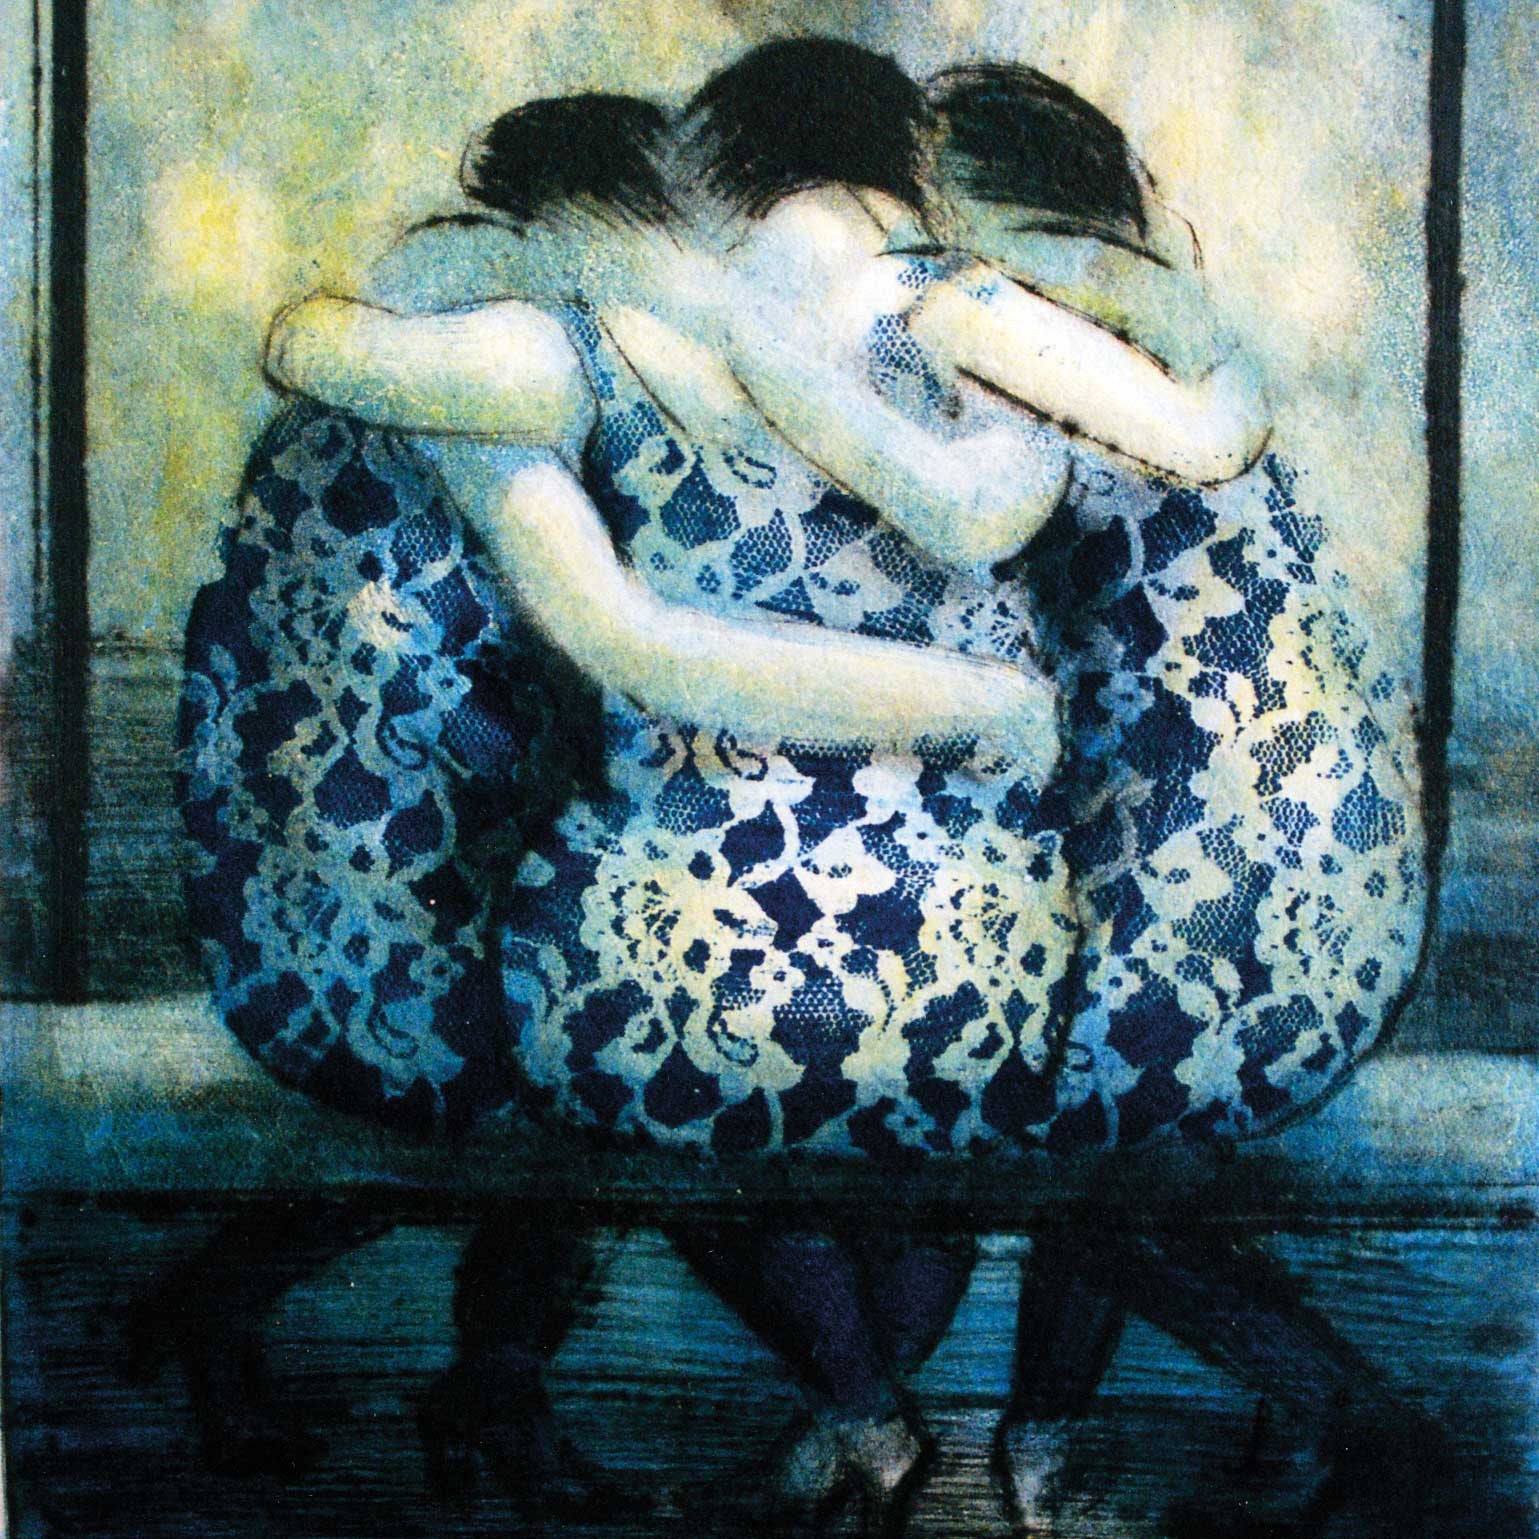 Art Greeting Card, Three women with arms around each other